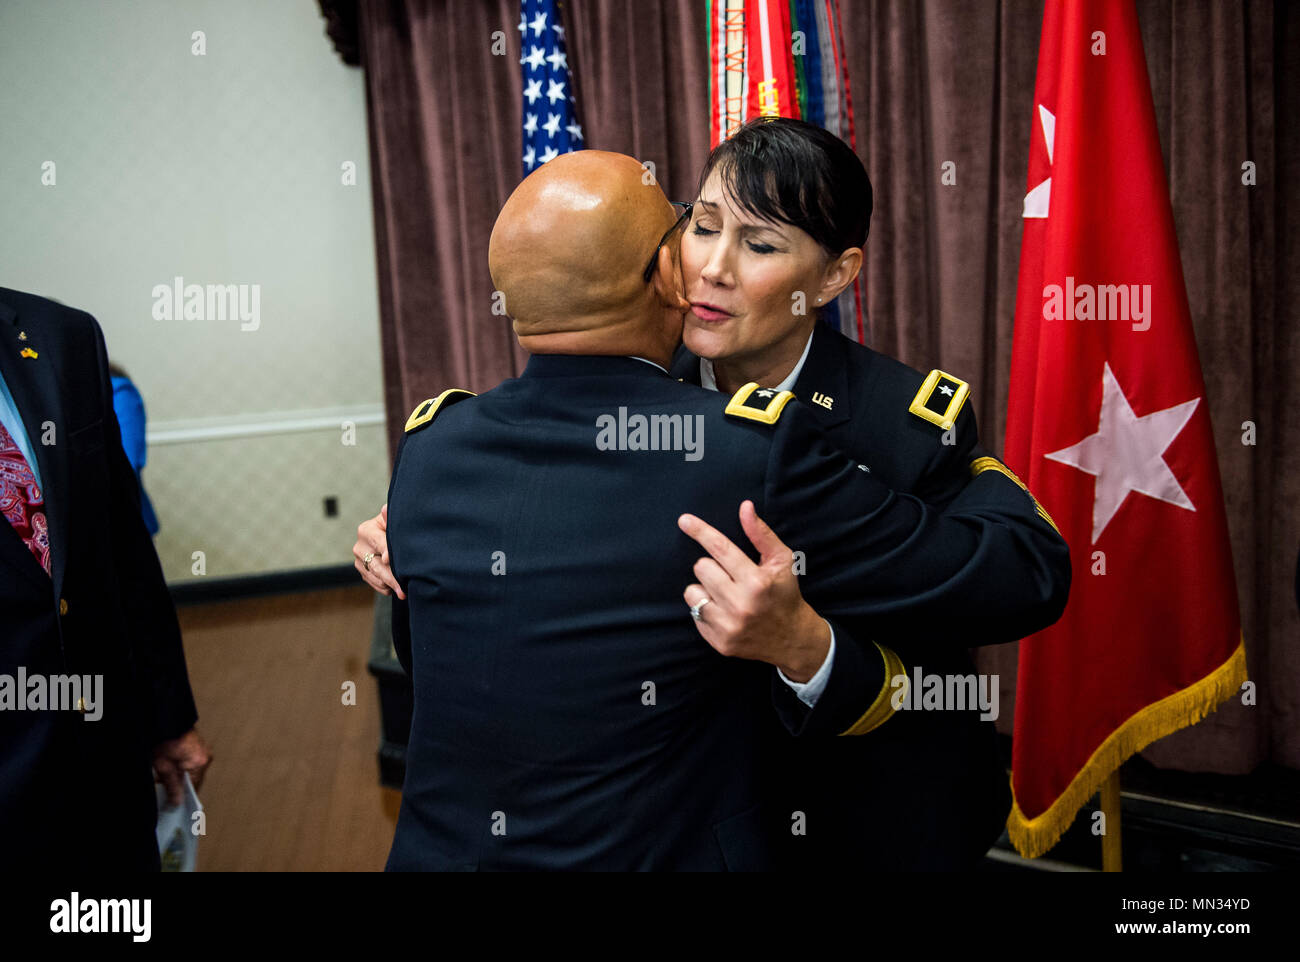 Brig. Gen. Irene Zoppi, U.S. Army Reserve deputy commanding general for the 200th Military Police Command, hugs Maj. Gen. (Ret.) Luis Visot, former chief of staff of the U.S. Army Reserve, after her promotion ceremony held on Fort Meade, Maryland, Aug. 28, 2017. During her ceremony, Zoppi expressed pride in her Latin American and Puerto Rican heritage, and she spoke about how her upbringing and culture brought passion and compassion to her military career and leadership style. As the deputy commanding general of support, Zoppi will be supporting Maj. Gen. Marion Garcia who is the commanding ge Stock Photo